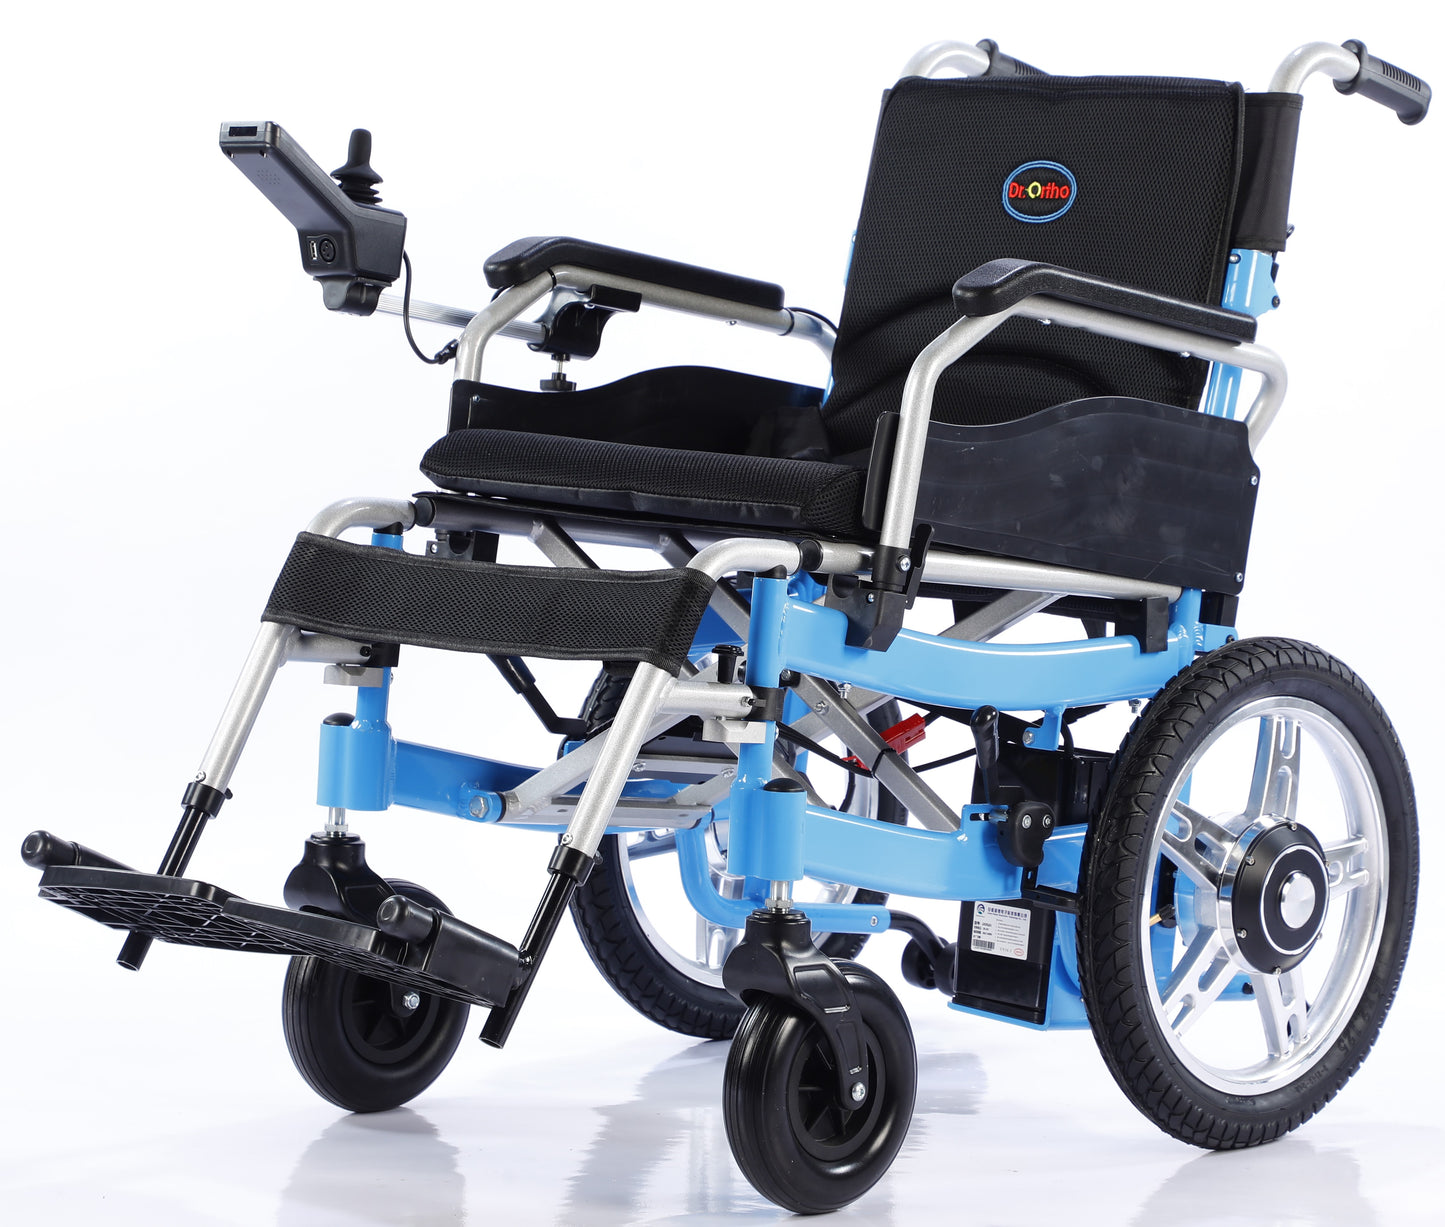 Dr.Ortho electric wheelchair DR-N-20-B light weight aluminum frame with lithium battery